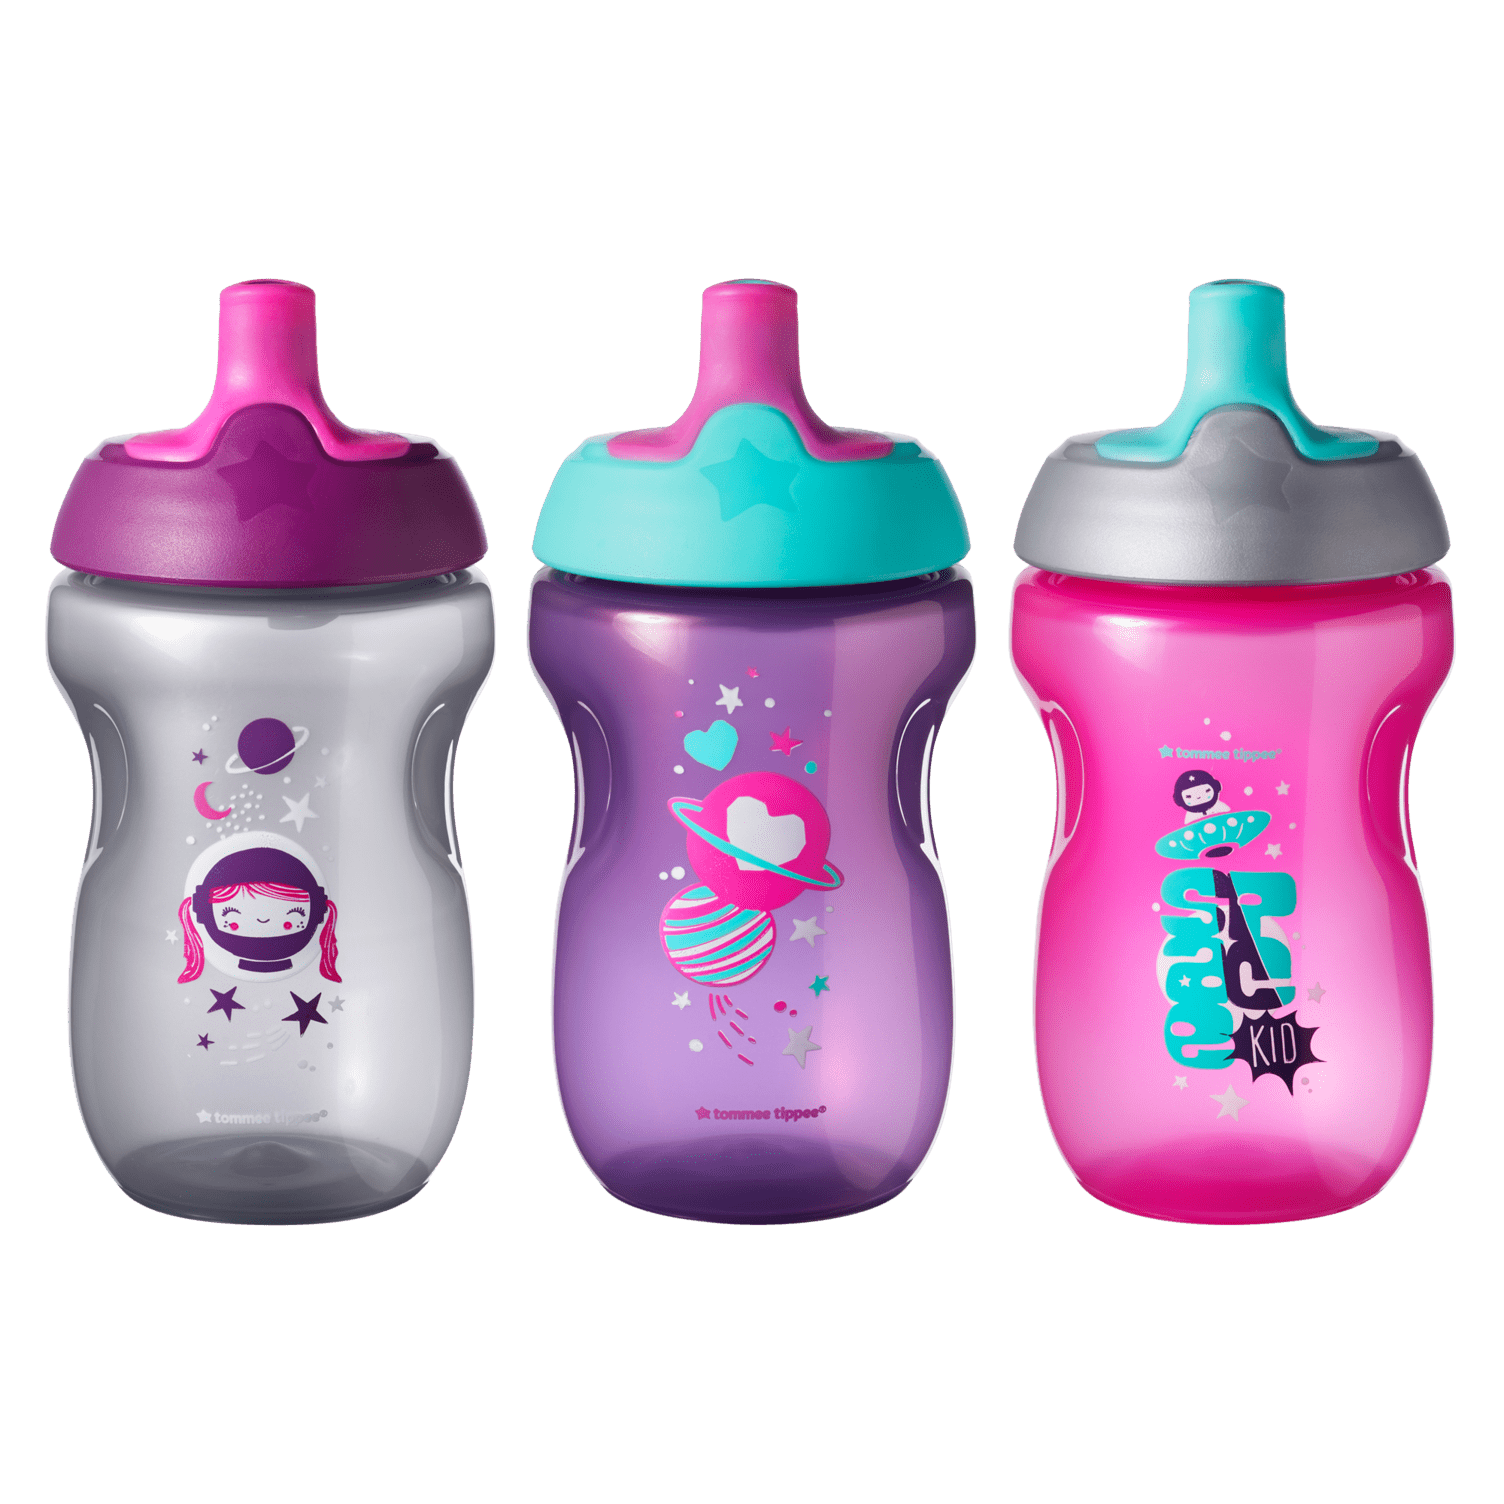 Details about   5 Pcs Lovely Disposable Juice Drink Packaging Bottle Plastic Cups for Children 